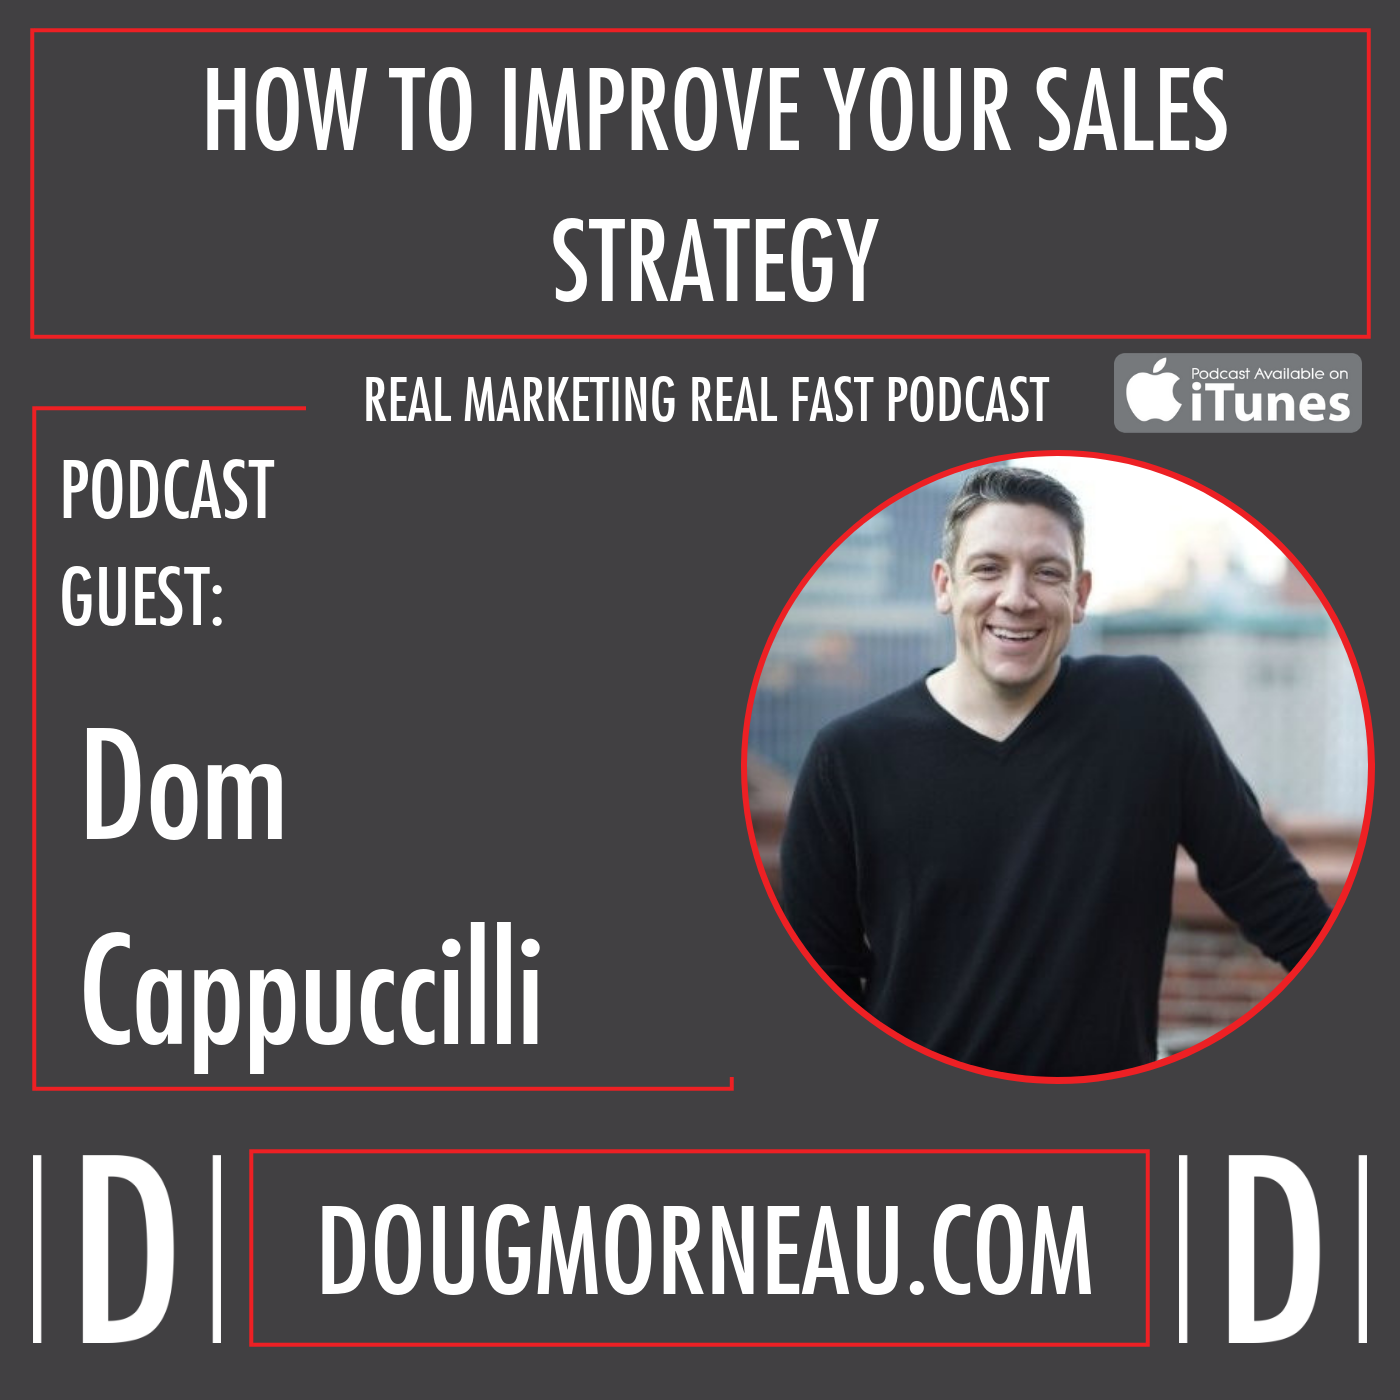 HOW TO IMPROVE YOUR SALES STRATEGY DOM CAPPUCCILLI - DOUG MORNEAU - REAL MARKETING REAL FAST PODCAST